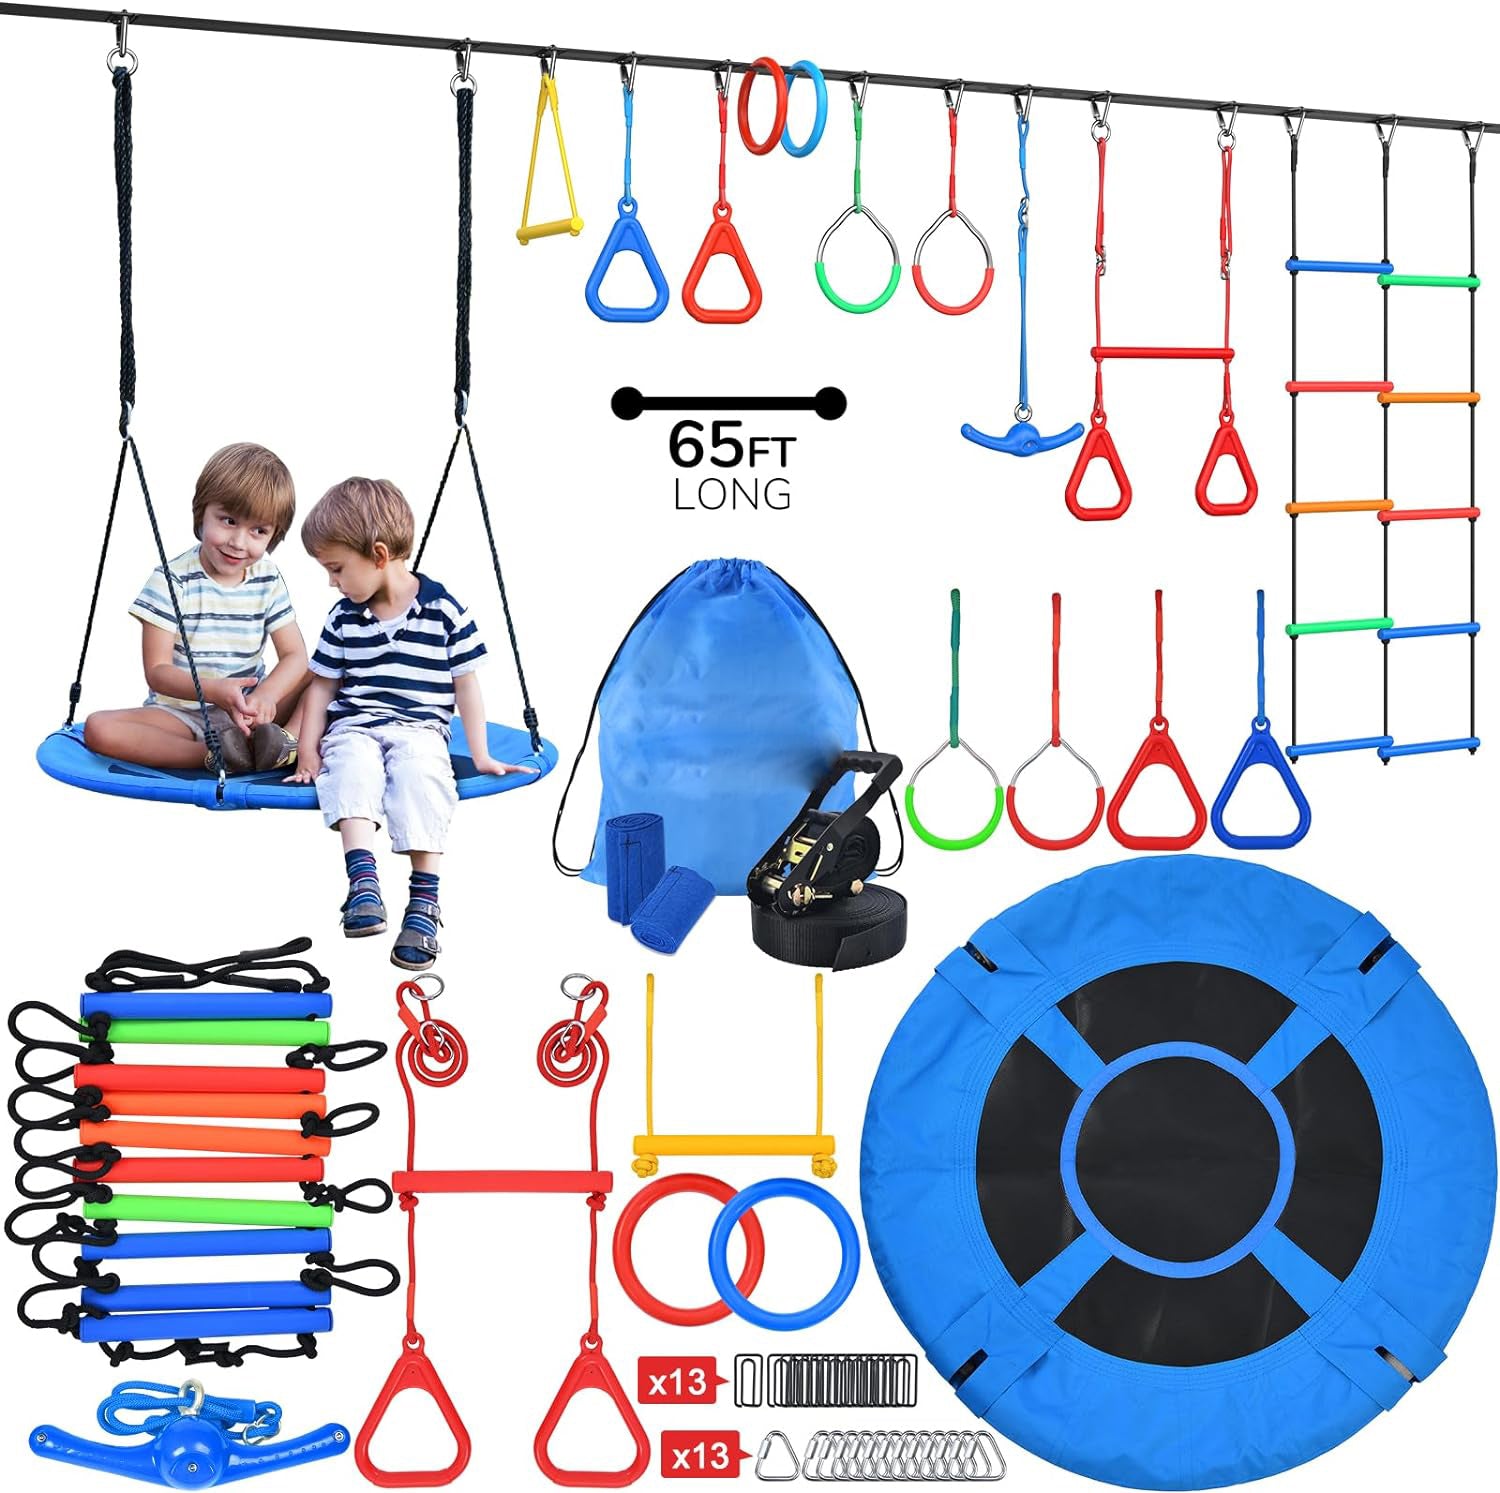 65ft Ninja Warrior Obstacle Course for Kids with Swing, Ninja Rope Course with 11 Obstacles